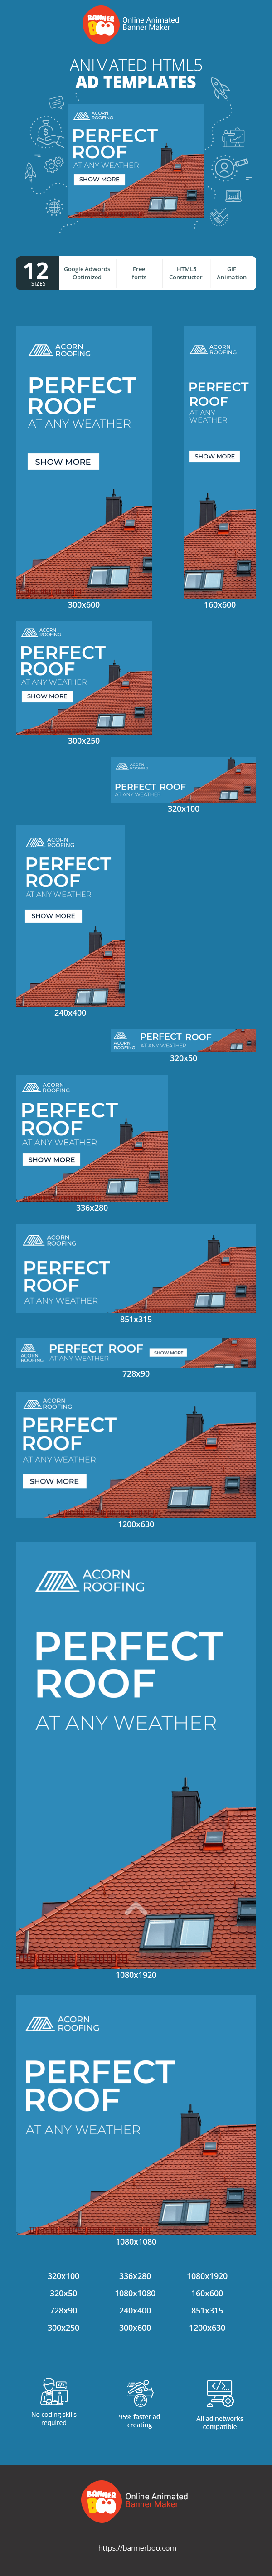 Banner ad template — Perfect Roof At Any Weather — Roofing